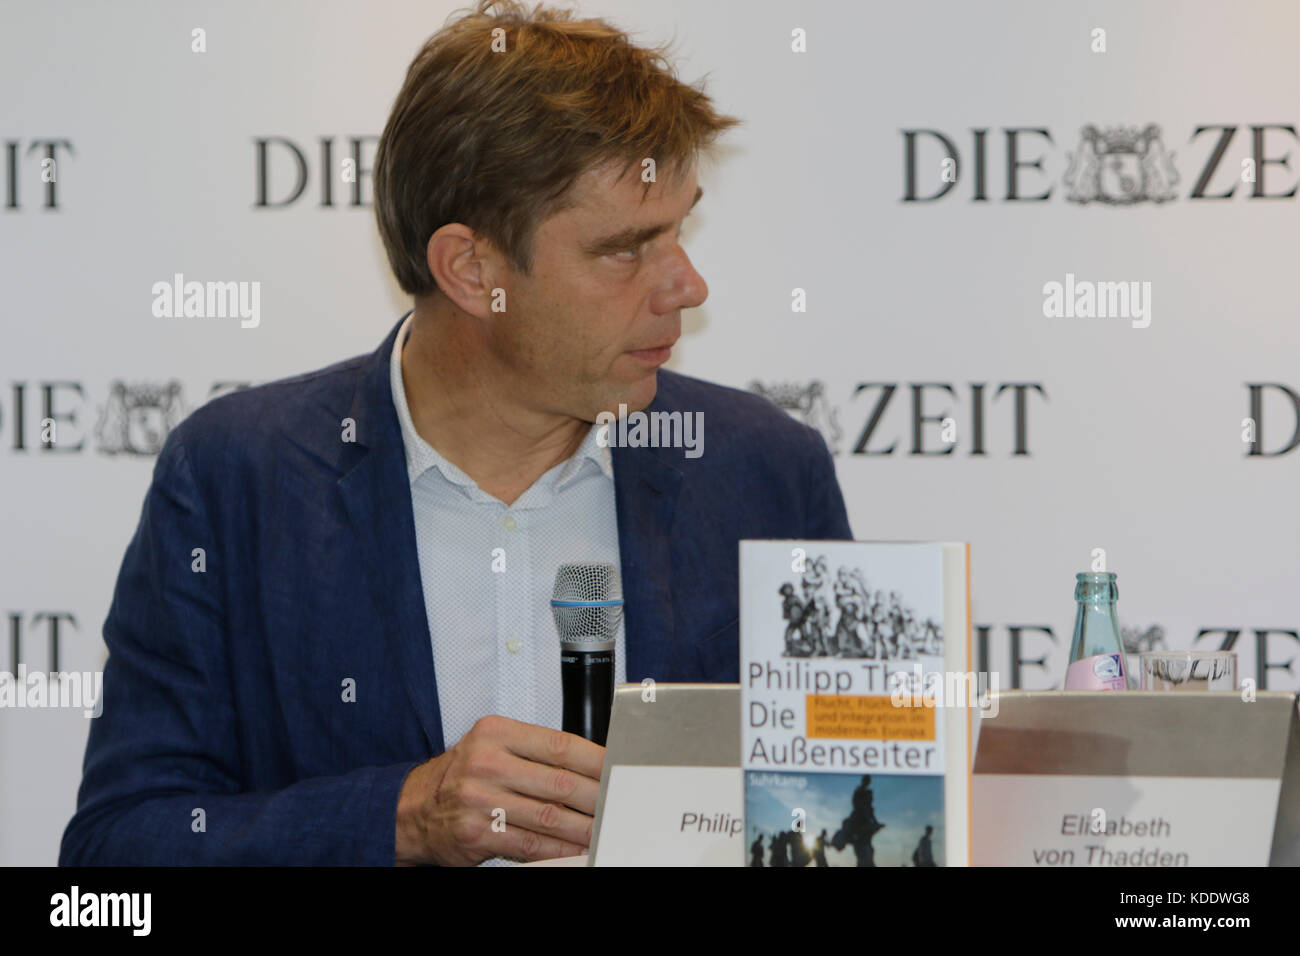 Frankfurt, Germany. 12th October 2017. Austrian historian Philipp Ther gives an interview at the booth of the German national weekly newspaper Die Zeit at the Frankfurt Book Fair. The Frankfurt Book Fair 2017 is the world largest book fair with over 7,000 exhibitors and over 250,000 expected visitors. It is open from the 11th to the 15th October with the last two days being open to the general public. Credit: Michael Debets/Alamy Live News Stock Photo